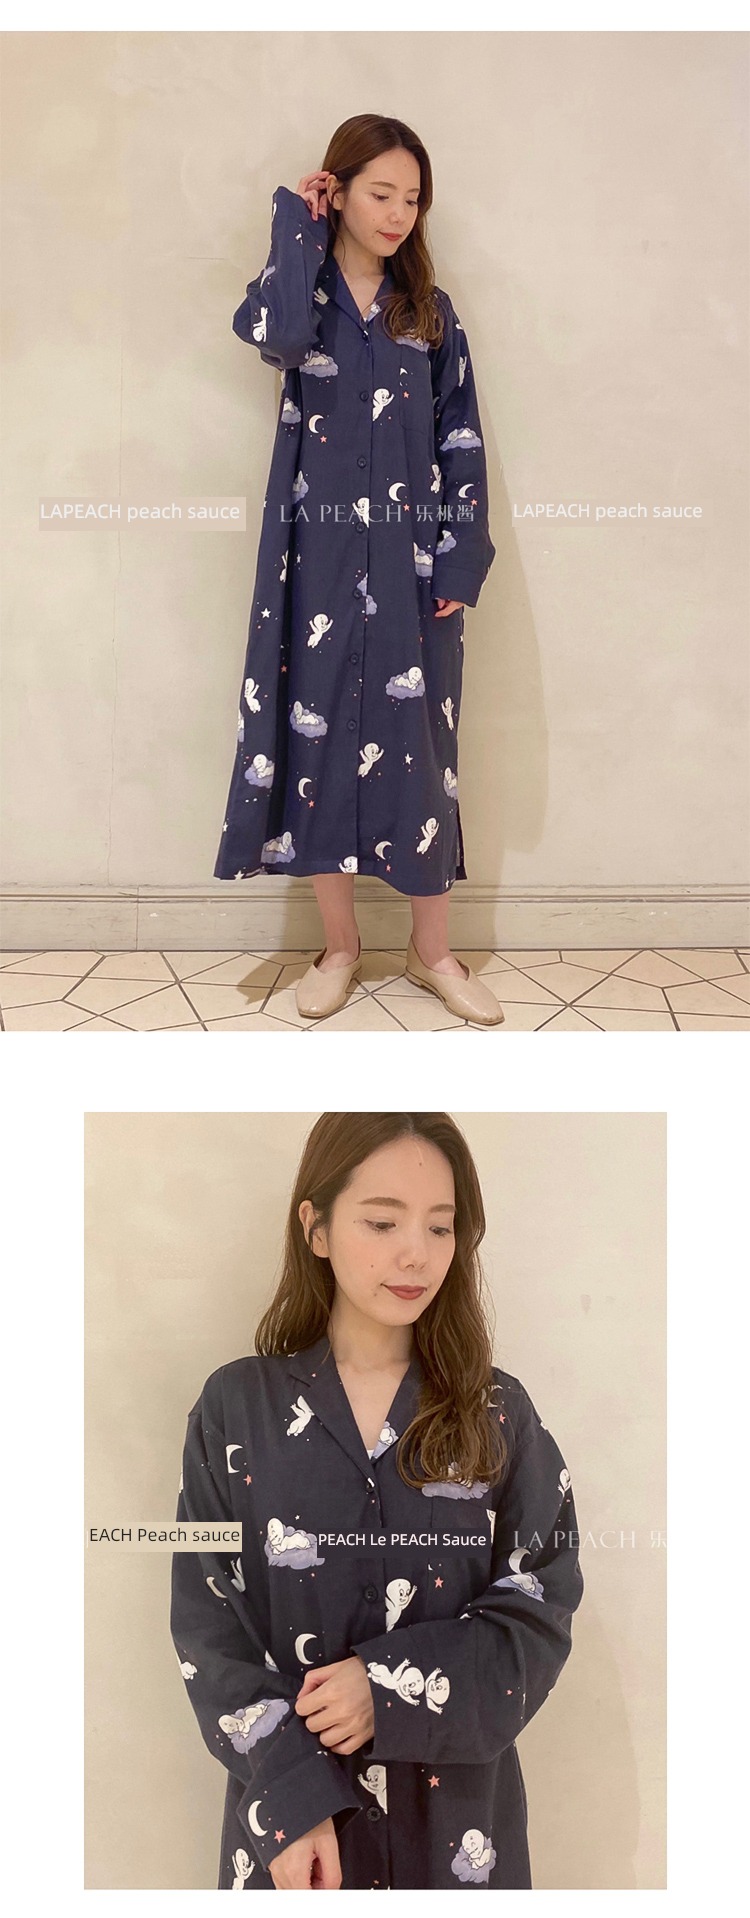 Le peach sauce the moon and the stars printing Nightdress cotton material female Cartoon